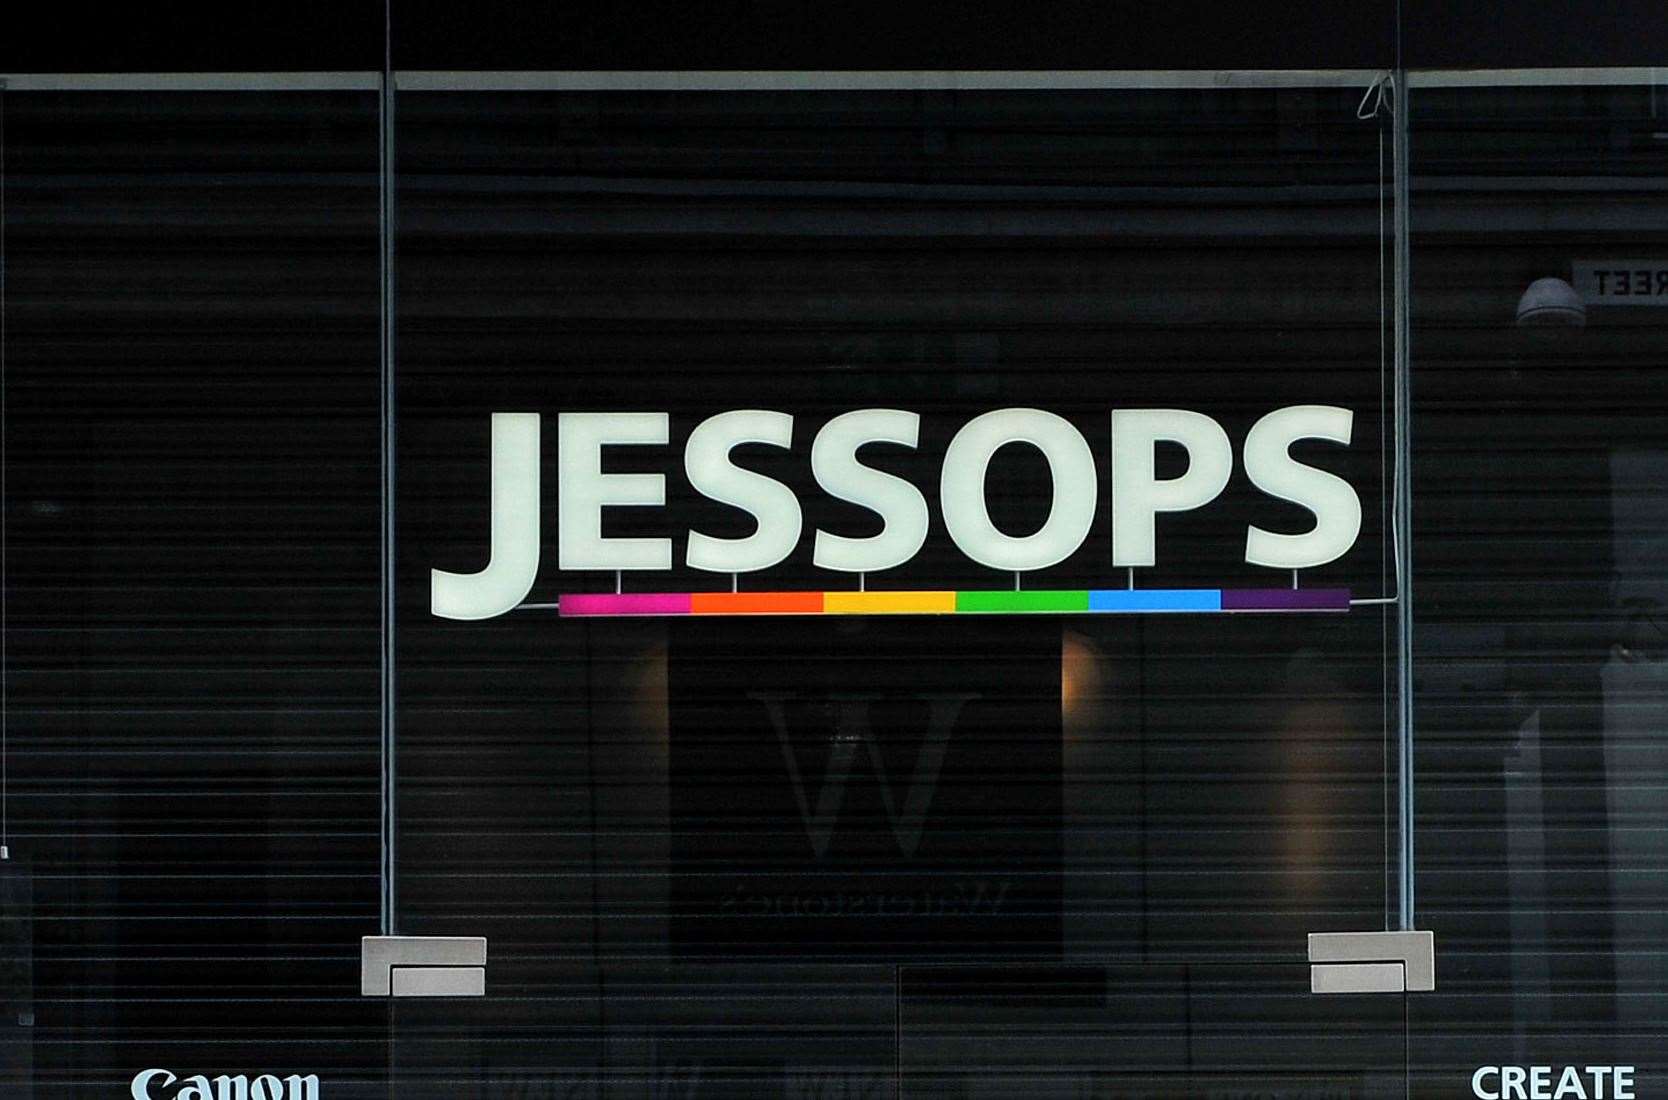 Jessops is now in administration